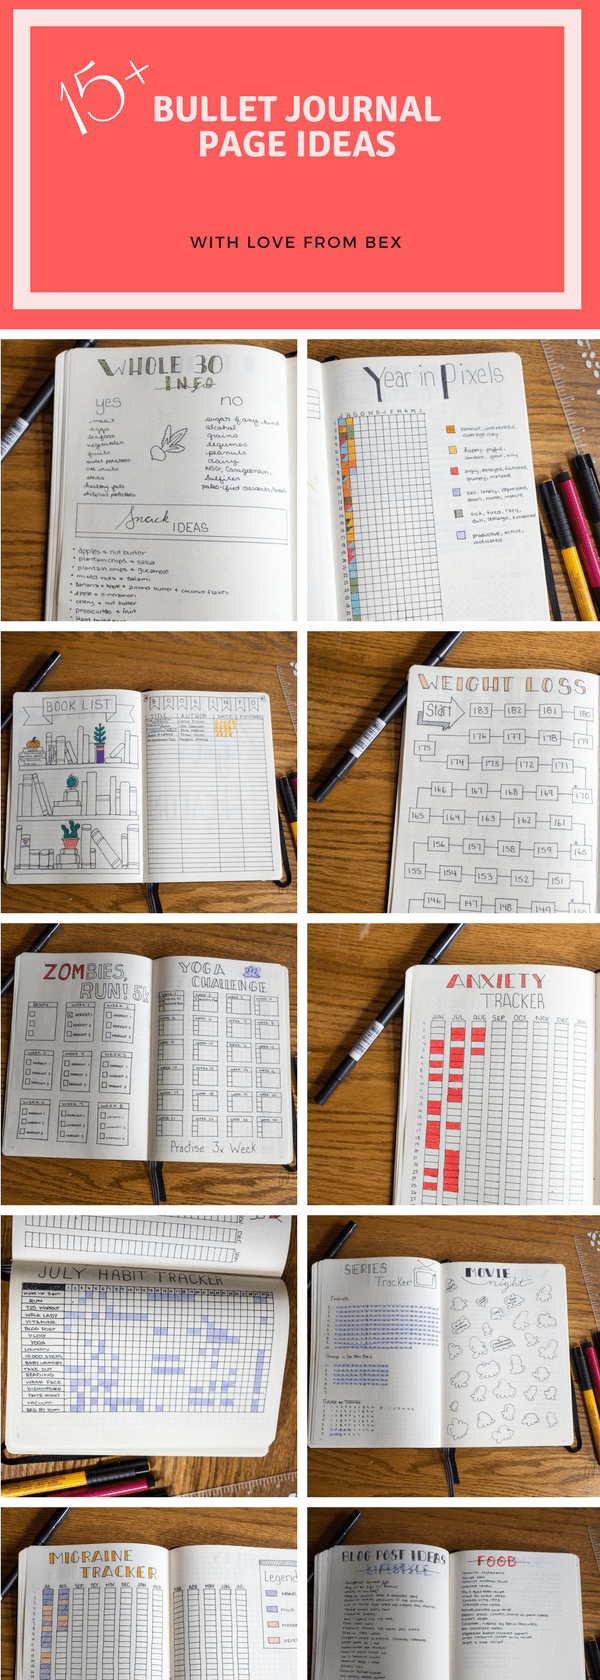 Bullet Journal Page Ideas